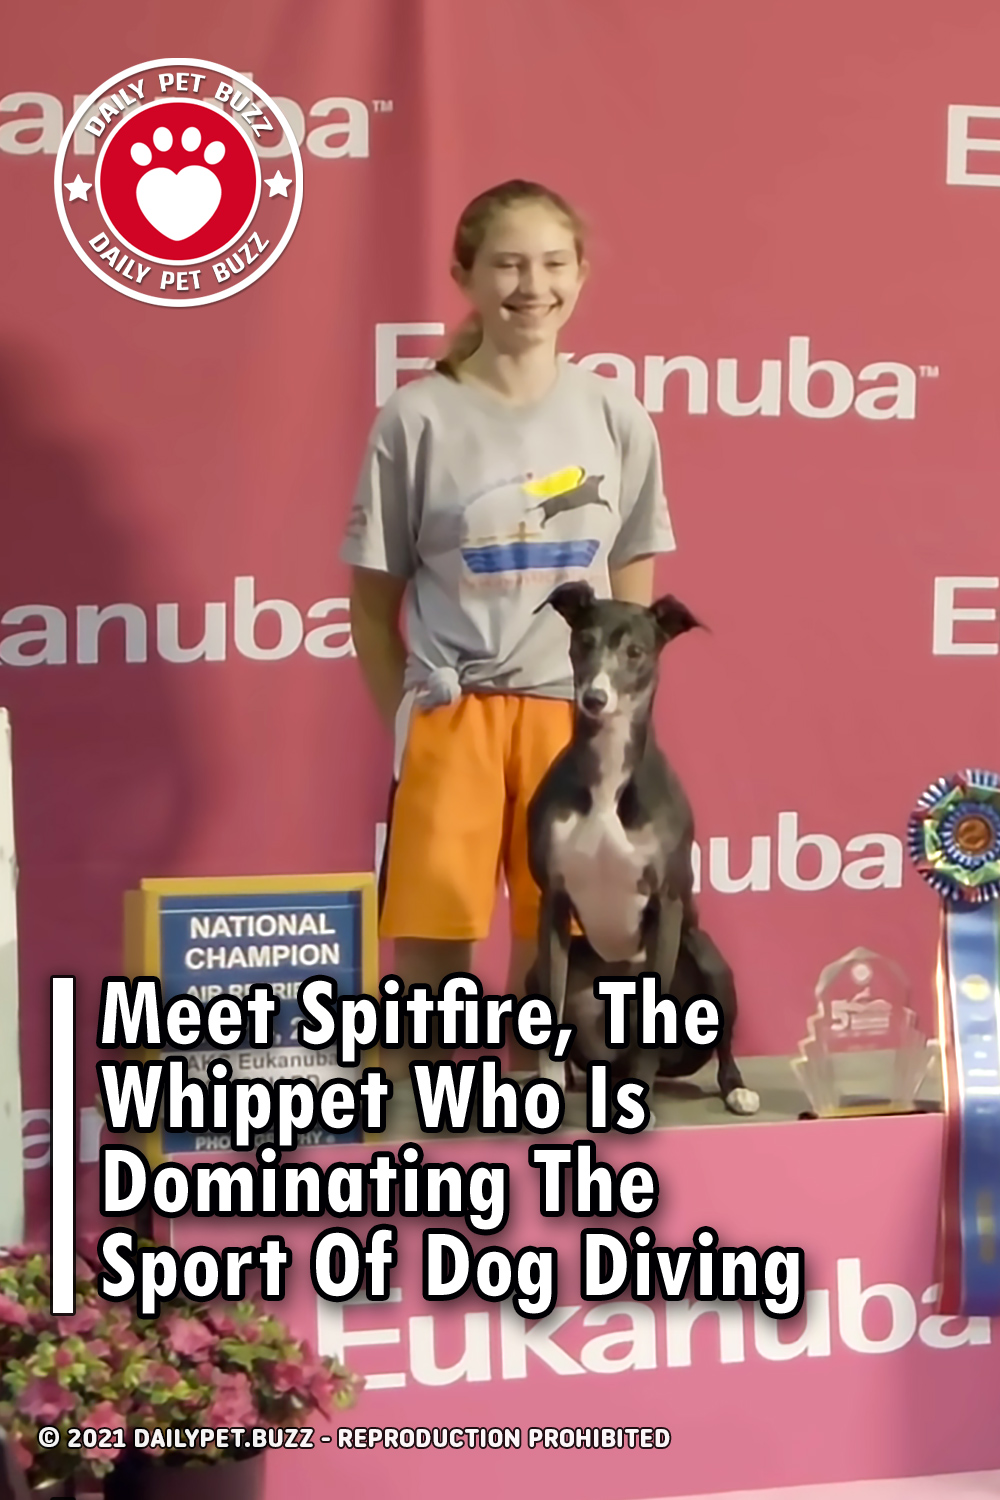 Meet Spitfire, The Whippet Who Is Dominating The Sport Of Dog Diving